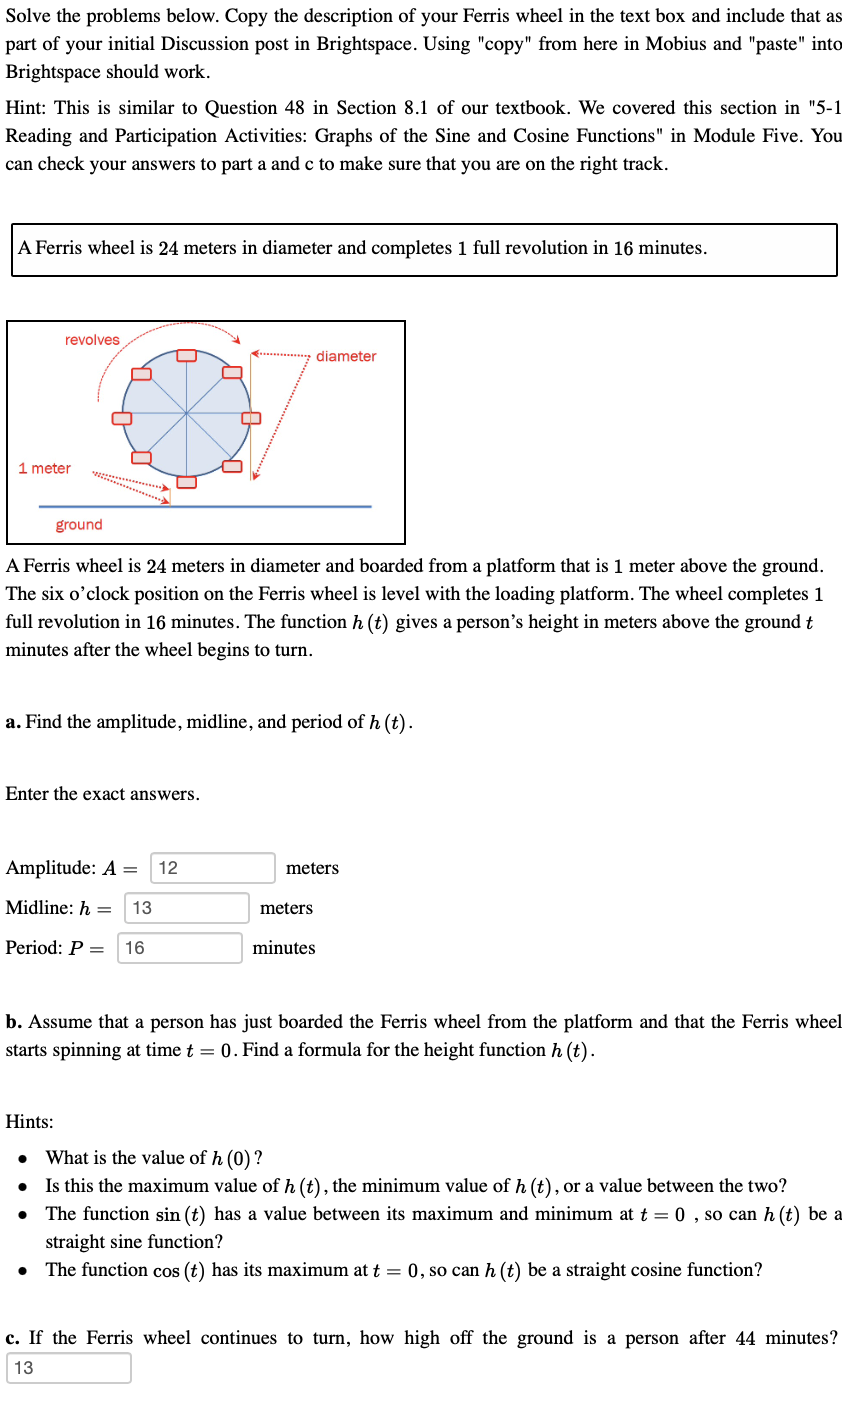 Solve the problems below. Copy the description of your Ferris wheel in the text box and include that as
part of your initial Discussion post in Brightspace. Using "copy" from here in Mobius and "paste" into
Brightspace should work.
Hint: This is similar to Question 48 in Section 8.1 of our textbook. We covered this section in "5-1
Reading and Participation Activities: Graphs of the Sine and Cosine Functions" in Module Five. You
can check your answers to part a and c to make sure that you are on the right track.
A Ferris wheel is 24 meters in diameter and completes 1 full revolution in 16 minutes.
revolves
diameter
1 meter
ground
A Ferris wheel is 24 meters in diameter and boarded from a platform that is 1 meter above the ground.
The six o'clock position on the Ferris wheel is level with the loading platform. The wheel completes 1
full revolution in 16 minutes. The function h (t) gives a person's height in meters above the ground t
minutes after the wheel begins to turn.
a. Find the amplitude, midline, and period of h (t).
Enter the exact answers.
Amplitude: A =
12
meters
Midline: h =
13
meters
Period: P =
16
minutes
b. Assume that a person has just boarded the Ferris wheel from the platform and that the Ferris wheel
starts spinning at time t = 0. Find a formula for the height function h (t).
Hints:
What is the value of h (0) ?
• Is this the maximum value of h (t), the minimum value of h (t), or a value between the two?
The function sin (t) has a value between its maximum and minimum at t = 0 , so can h (t) be a
straight sine function?
The function cos (t) has its maximum at t = 0, so can h (t) be a straight cosine function?
c. If the Ferris wheel continues to turn, how high off the ground is a person after 44 minutes?
13
